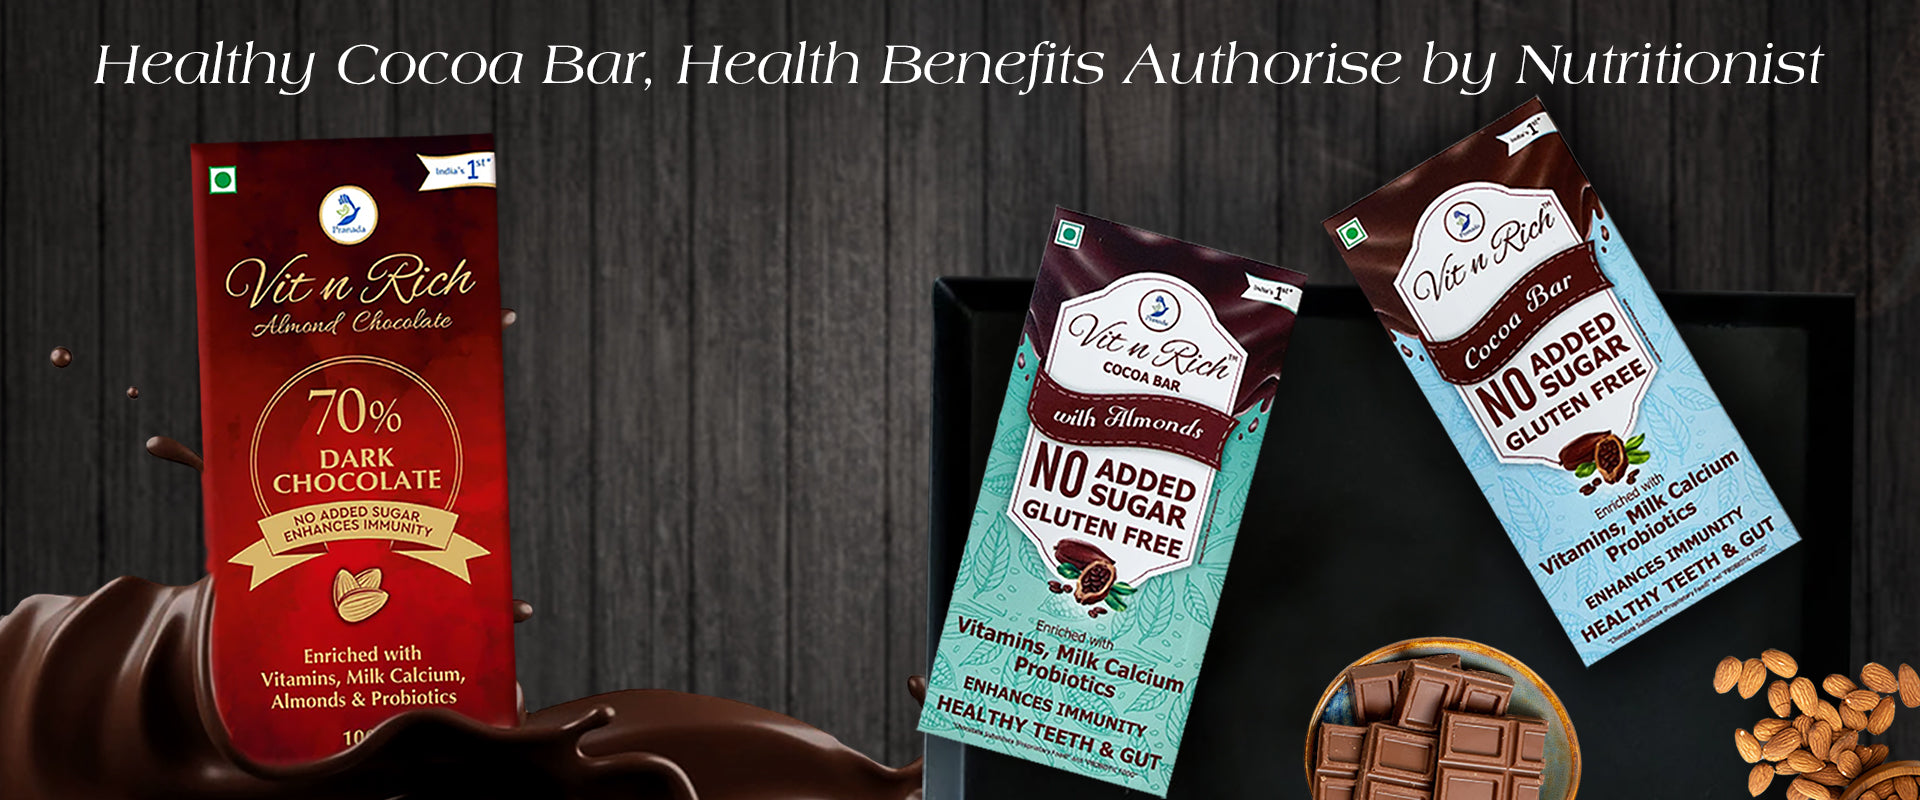 Healthy Chocolate Bars,Health Benefits authorize by Nutritionist